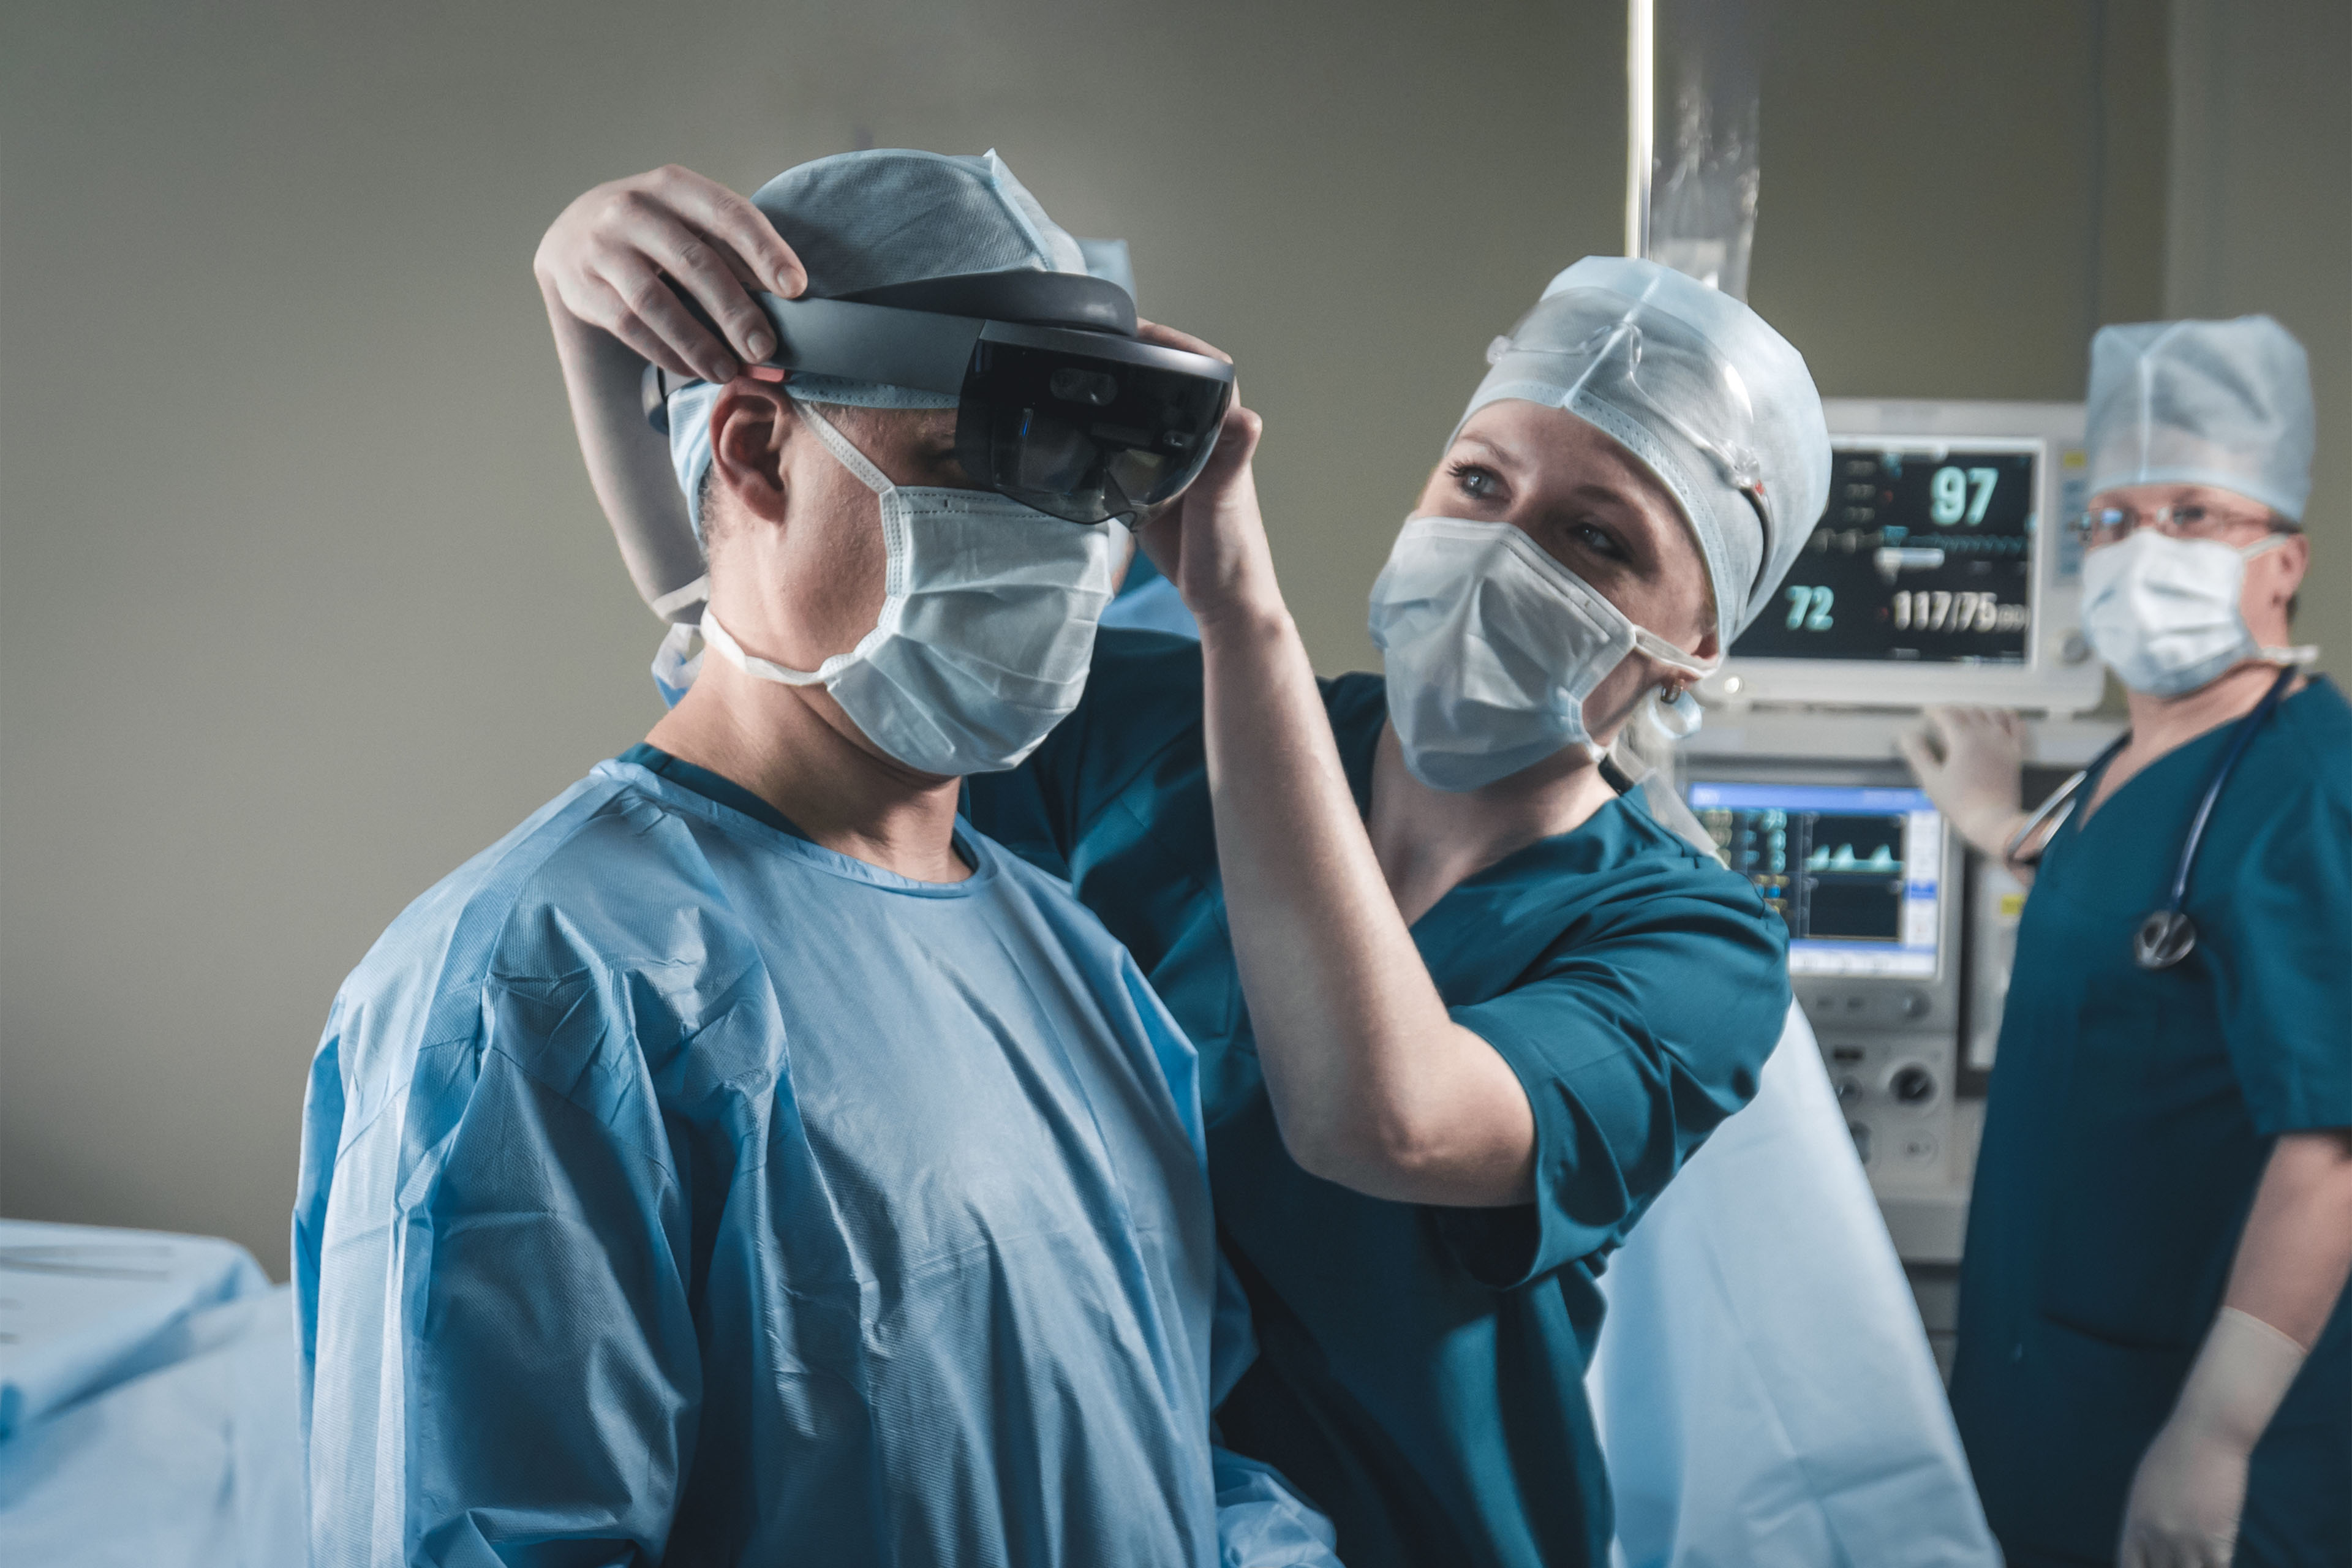 Nurse assisting surgeon with mounting augmented reality holographic